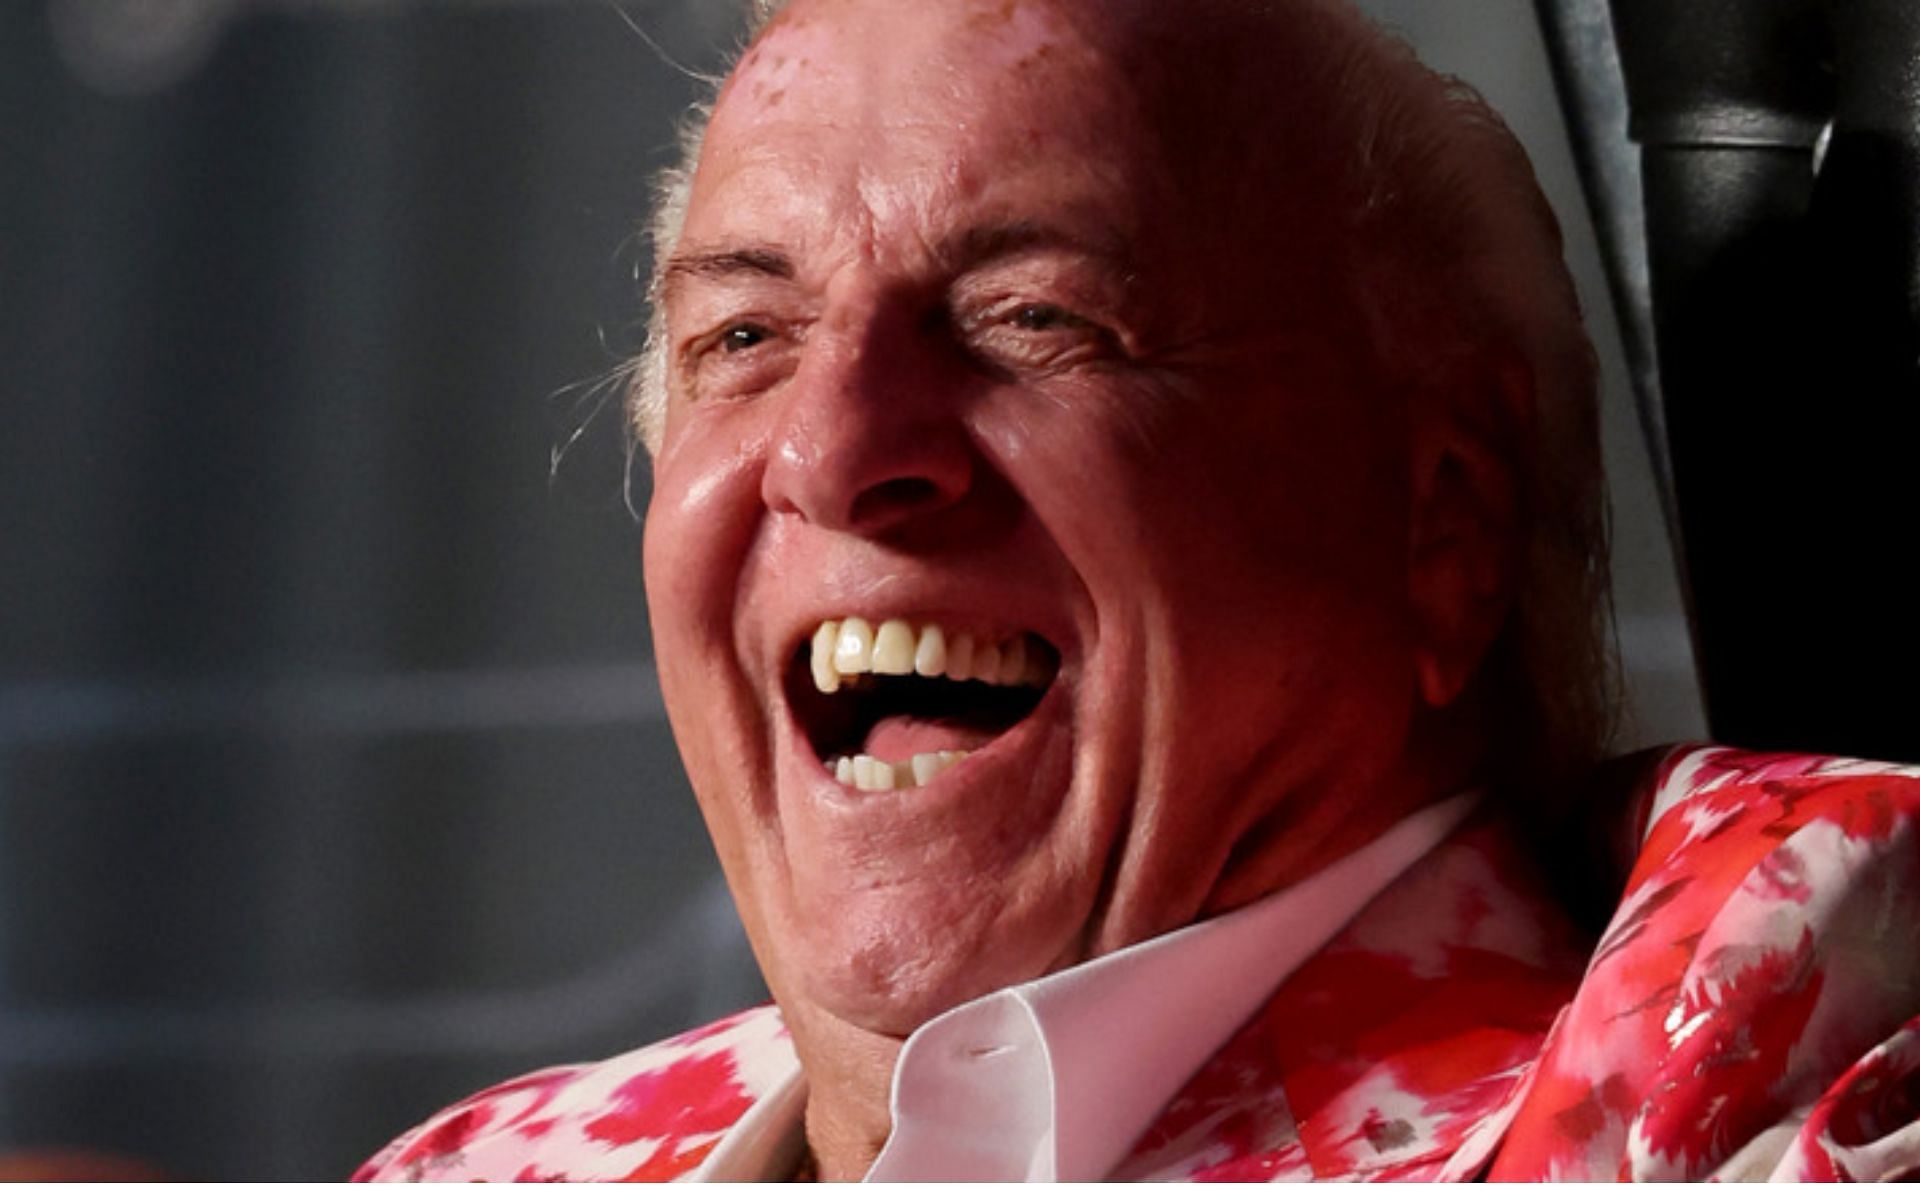 Ric Flair is considered by many as the greatest wrestler of all time